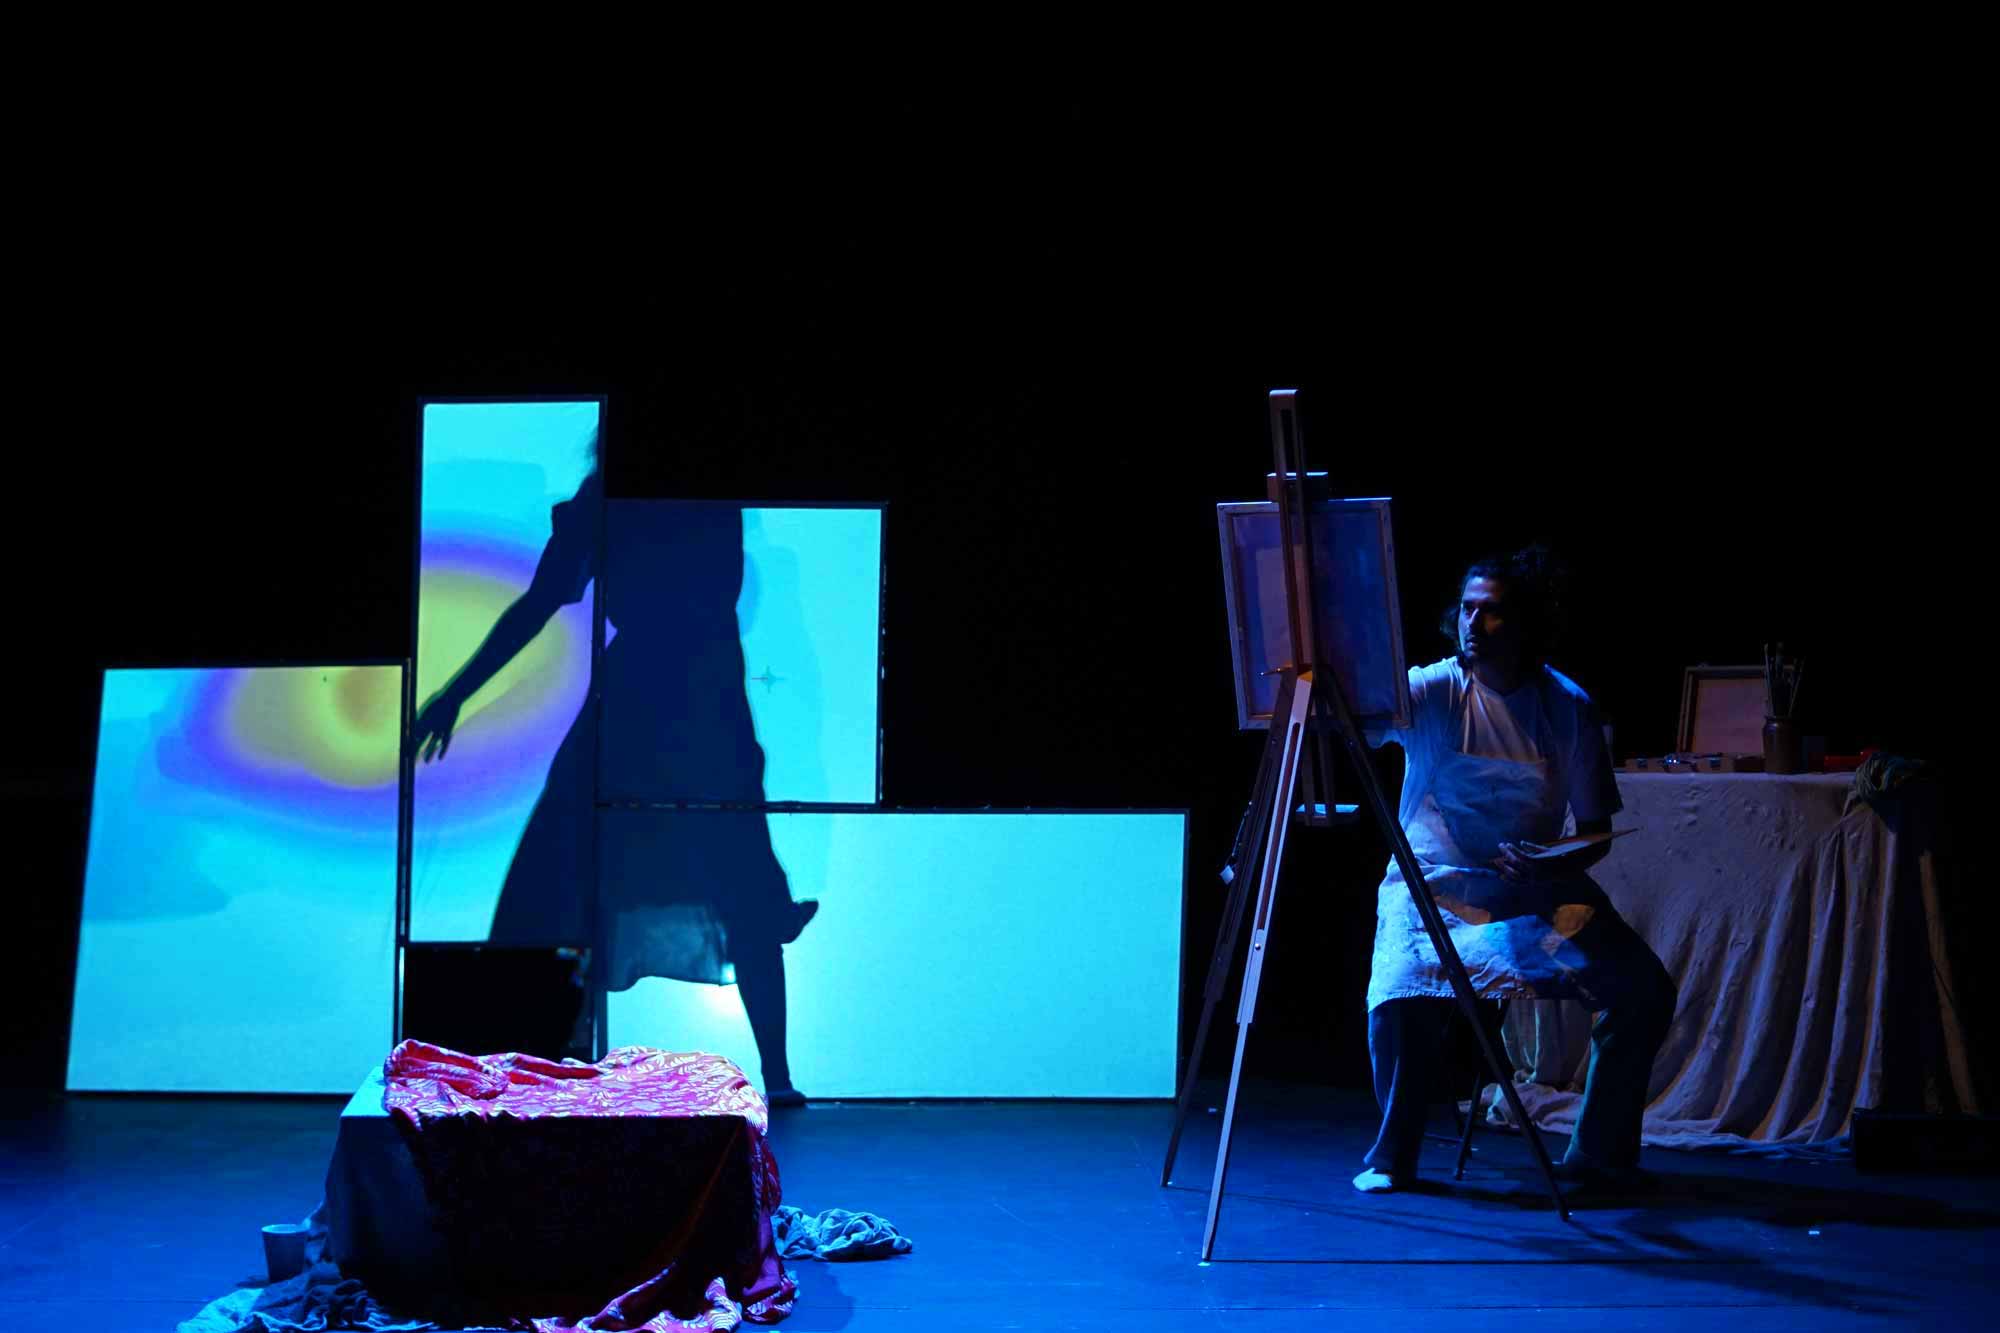 four screens stacked on top of each other creating a geometric effect. The screen shows vibrant colours and auras of turquoise, blue, yellow, orange and purple. A woman is moving in front of it while the male artist is painting her.